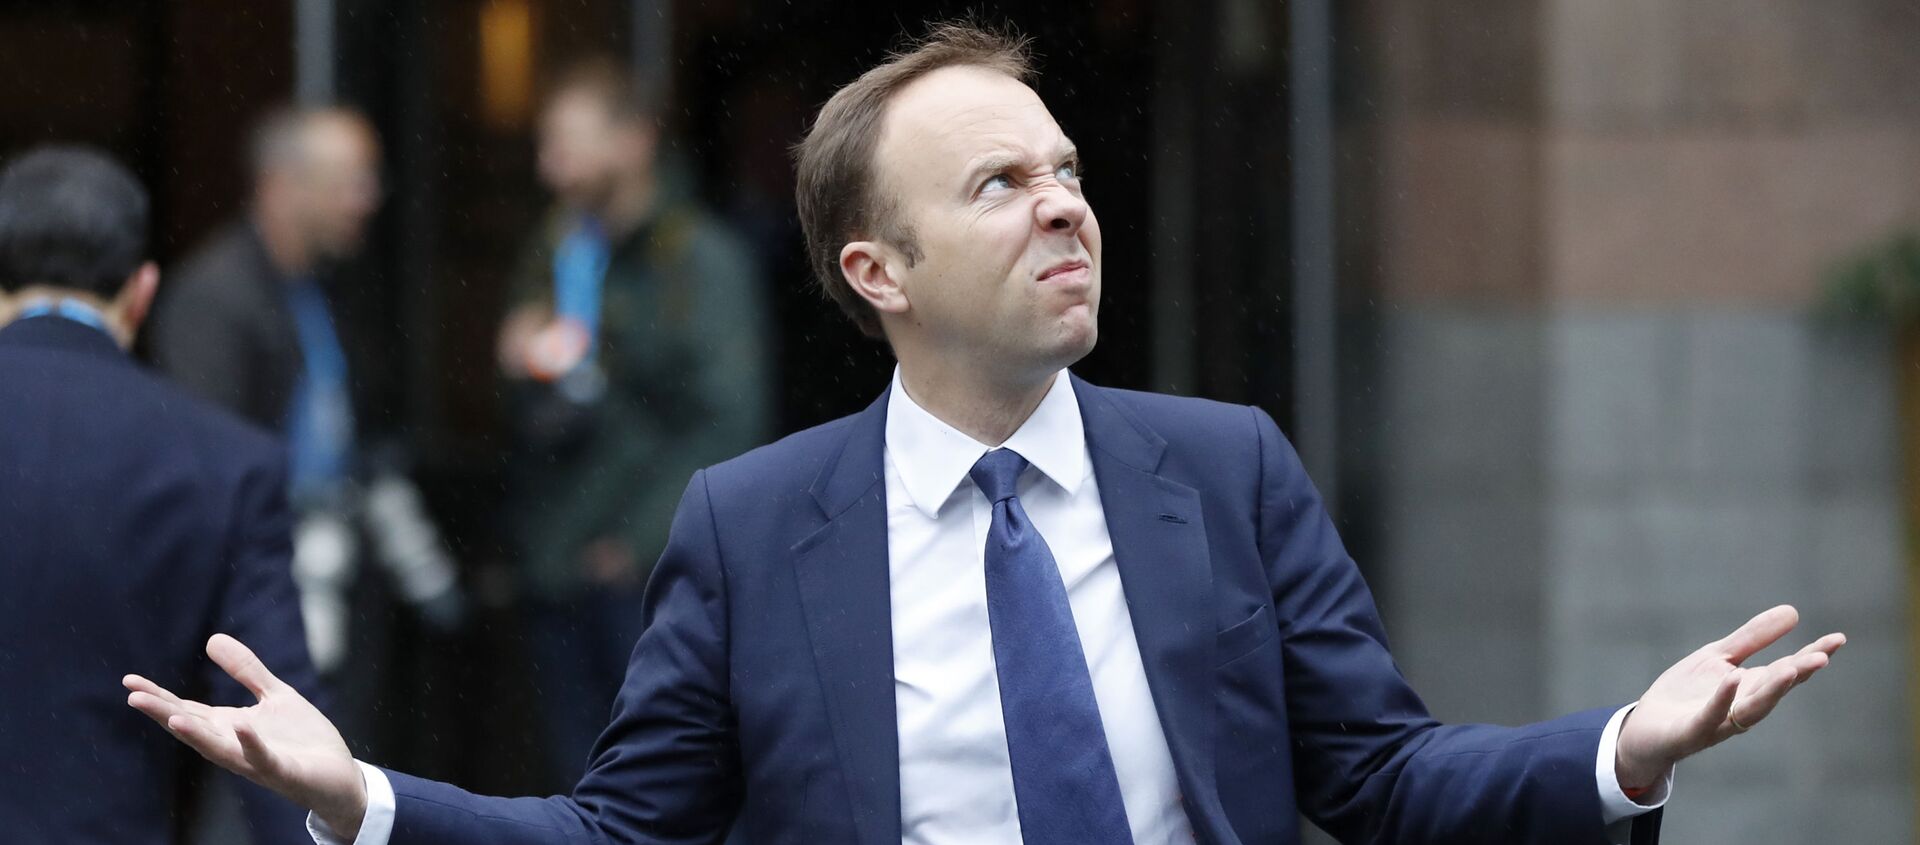 Matt Hancock, Secretary of State for Health and Social Care, walks through the rain to the Conservative Party Conference in Manchester, England, Tuesday, Oct. 1, 2019.  - Sputnik International, 1920, 16.06.2021